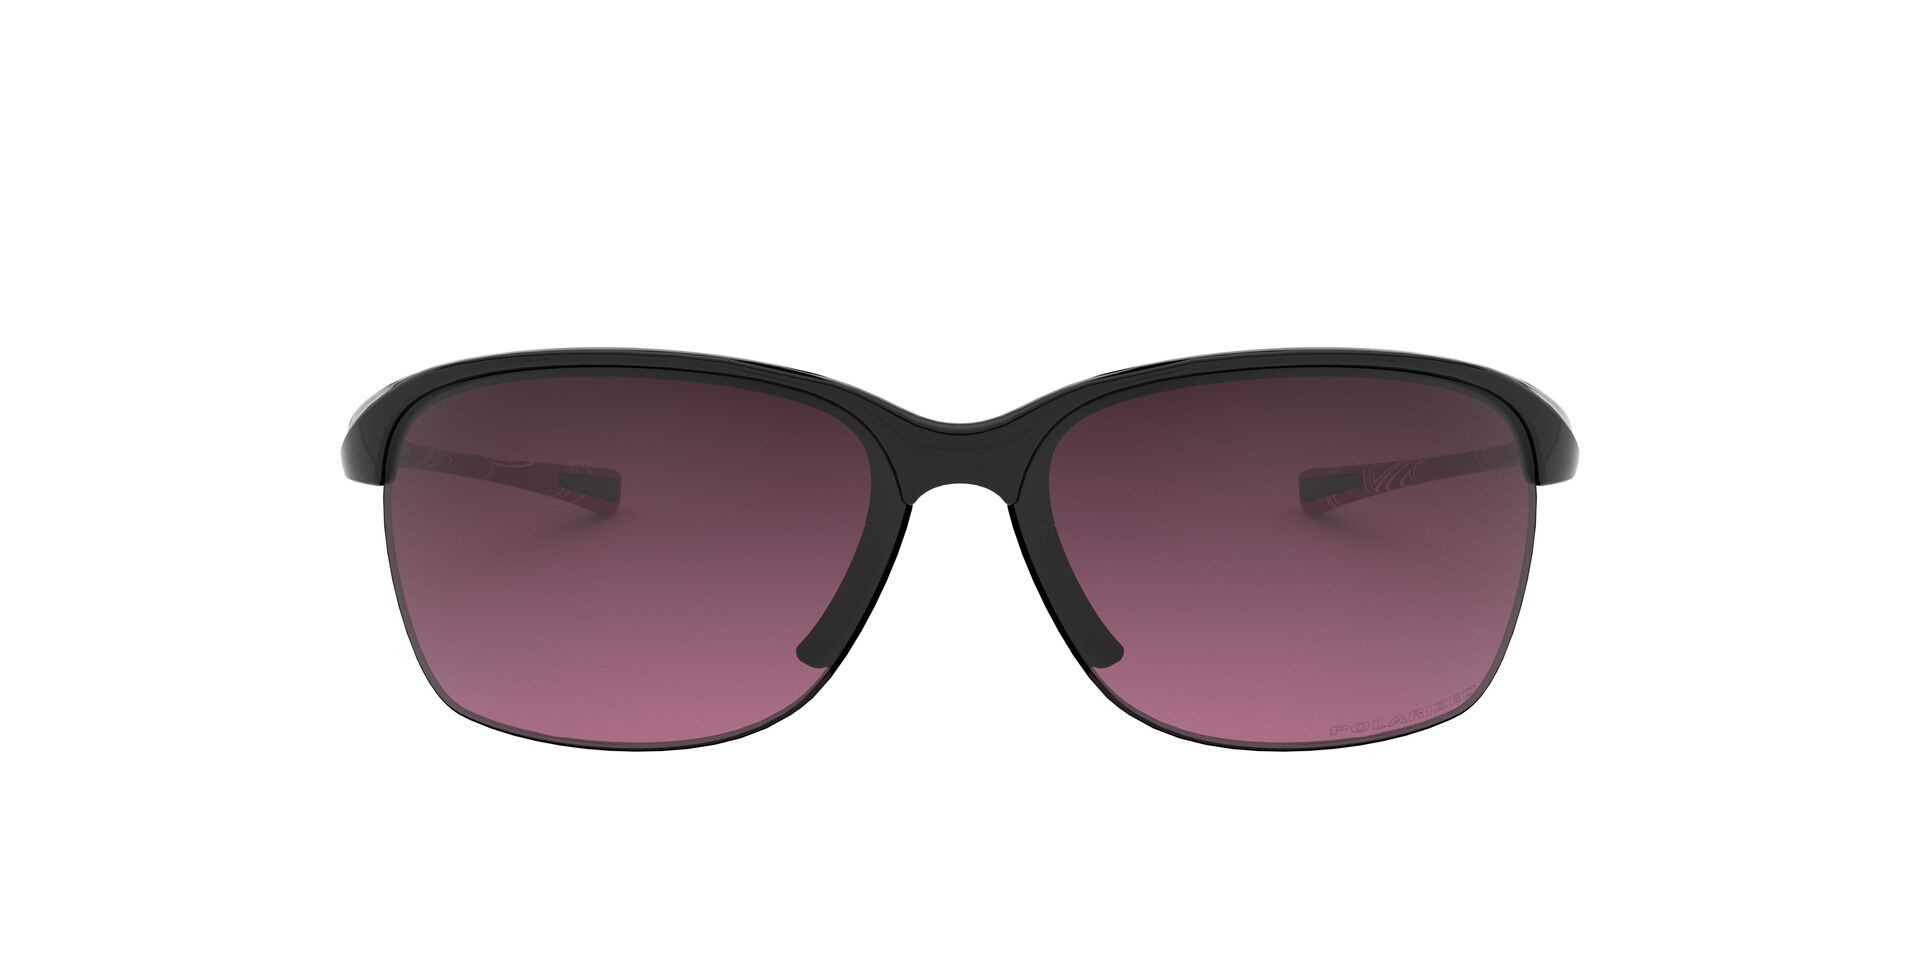 OAKLEY UNSTOPPABLE OO 9191 10, , hi-res image number 0